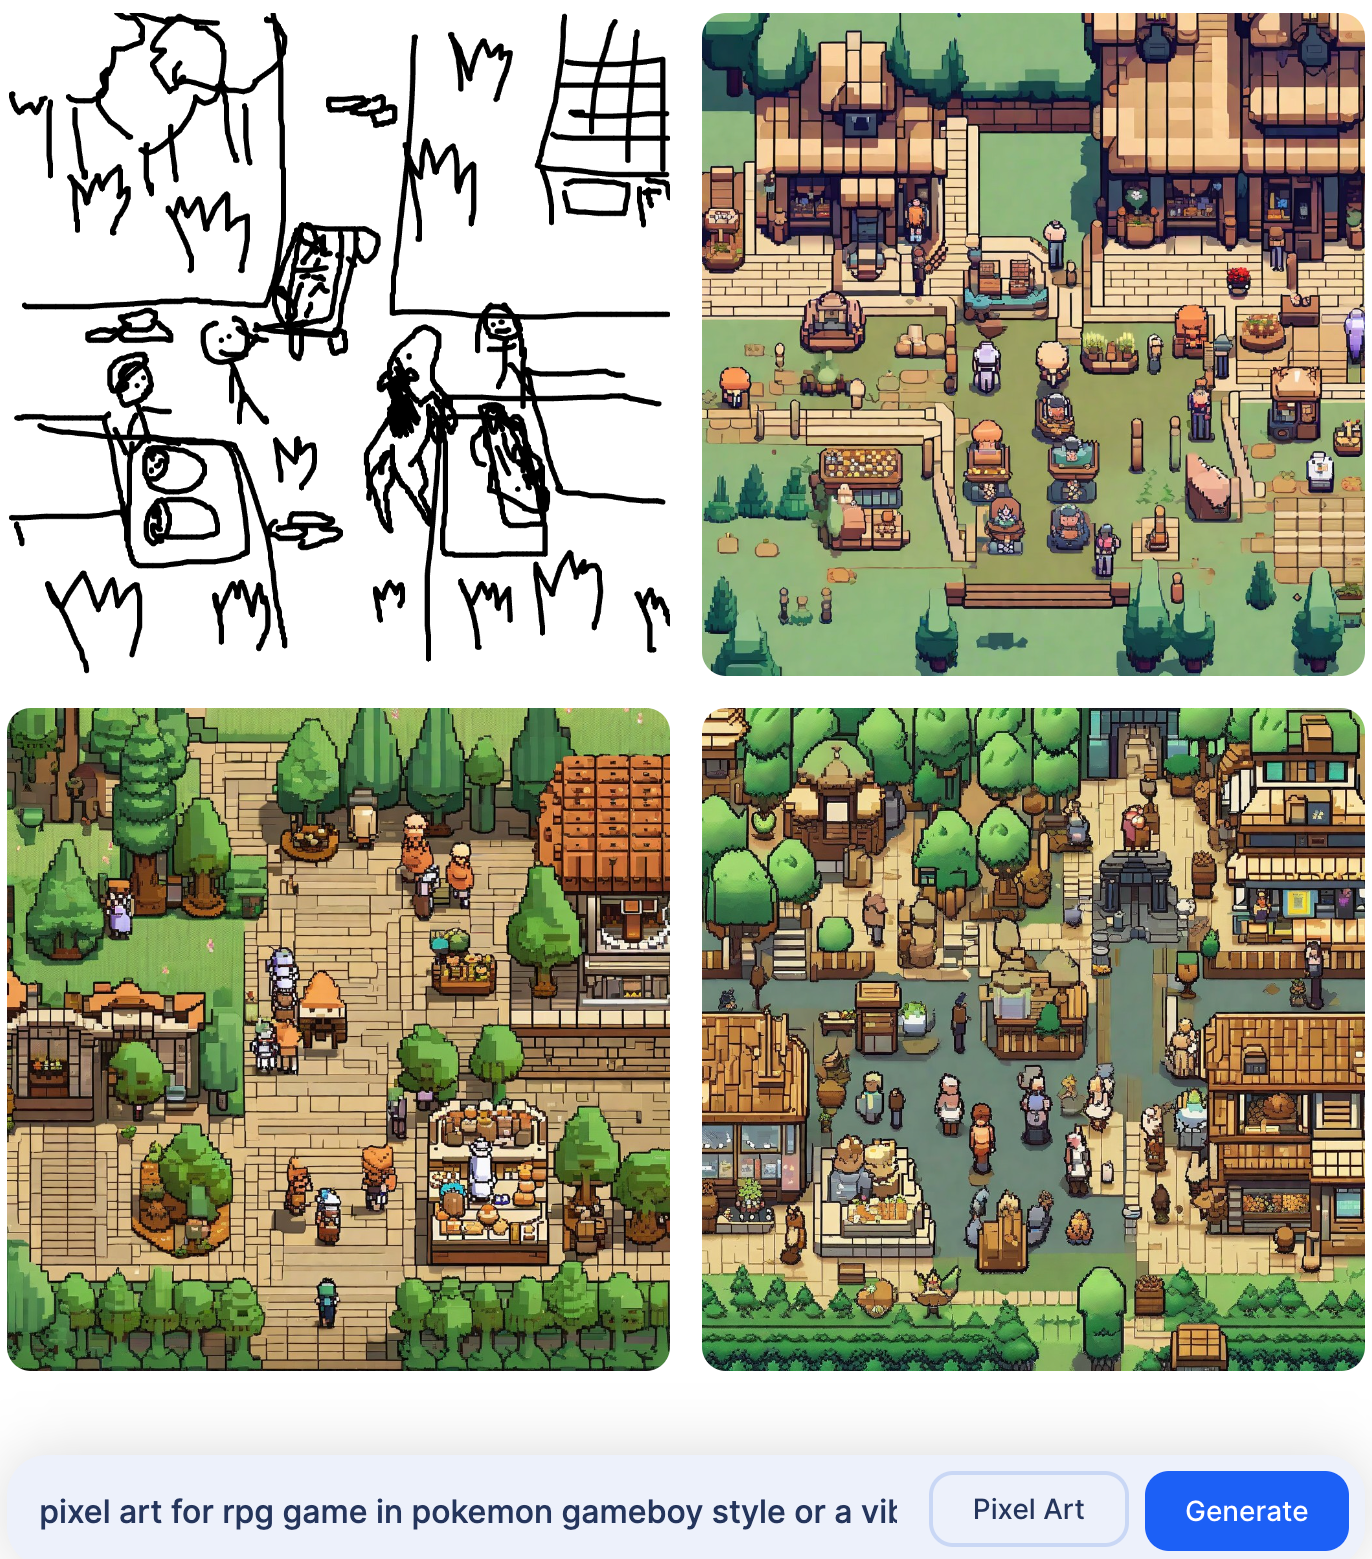 a pixel art city square with people and wooded area